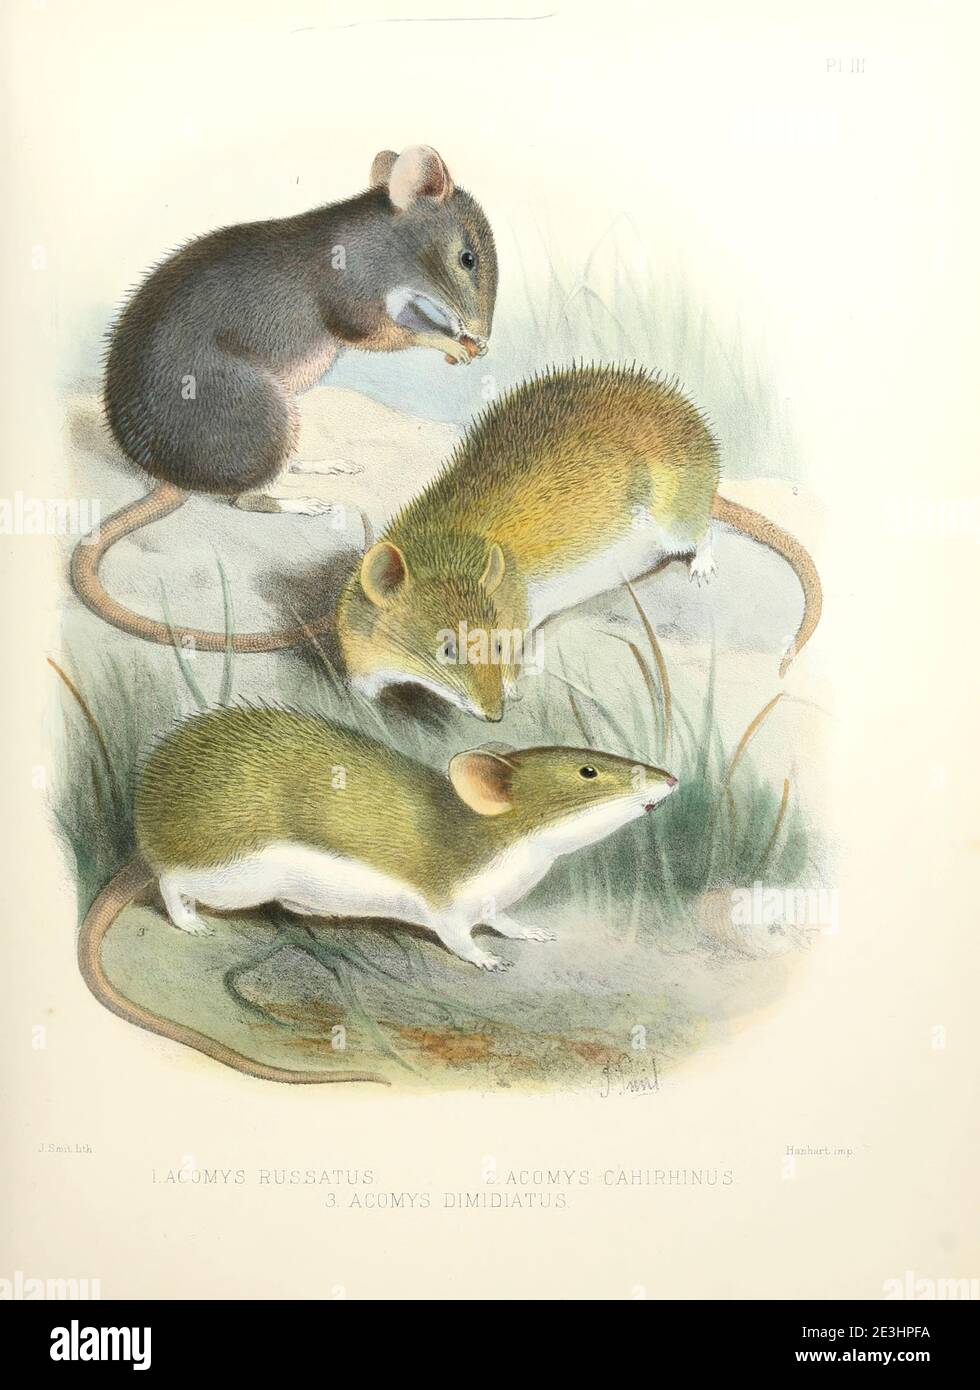 Spiny mouse species: Golden spiny mouse (Acomys russatus) [Top], Cairo spiny mouse (Acomys cahirinus [Here as Acomys cahirhinus]) [Centre] and  Eastern spiny mouse, Acomys dimidiatus From the survey of western Palestine. The fauna and flora of Palestine by Tristram, H. B. (Henry Baker), 1822-1906 Published by The Committee of the Palestine Exploration Fund, London, 1884 Stock Photo